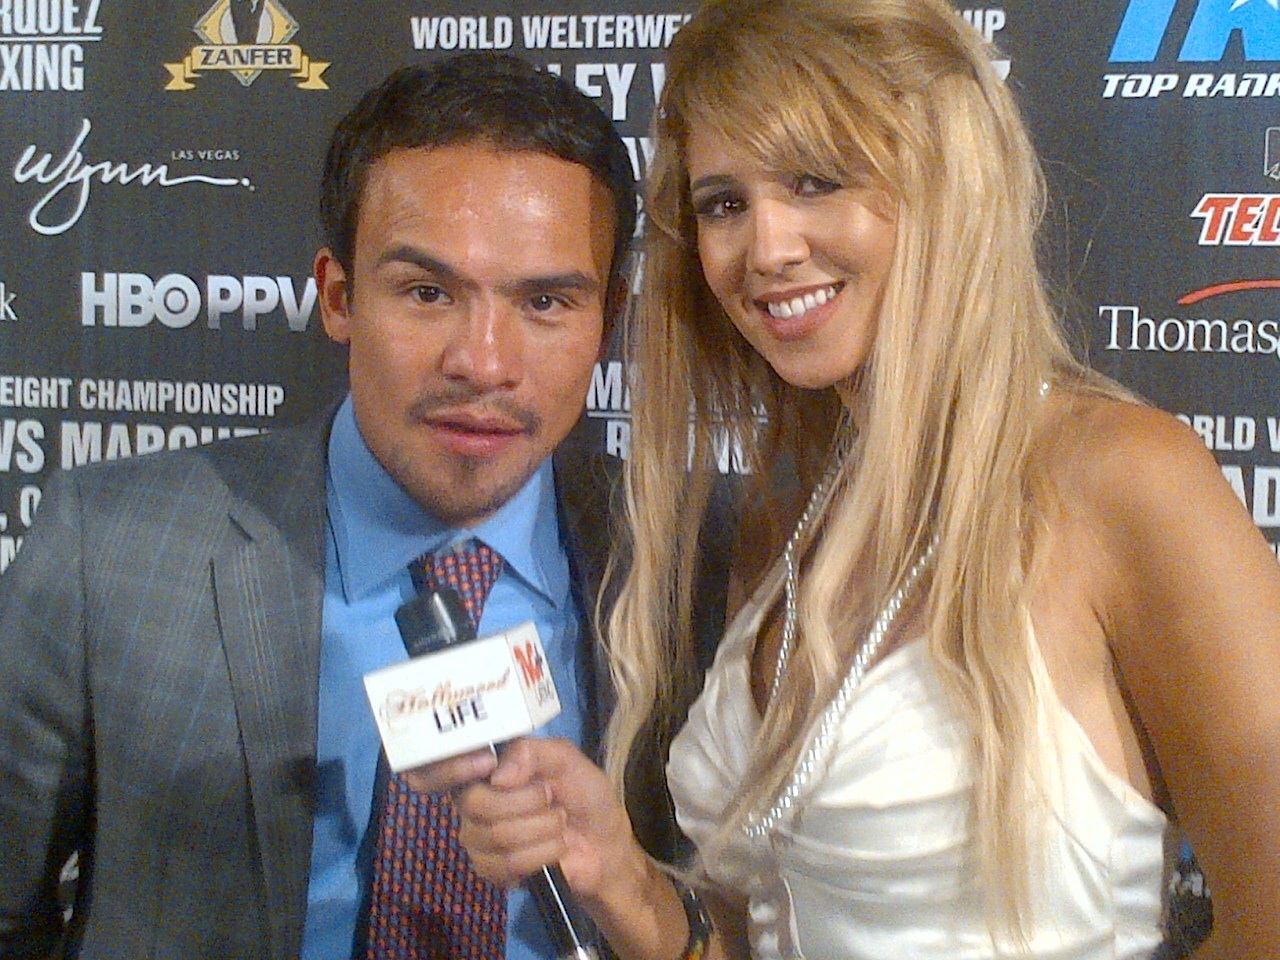 Juan manuel Marques interview by Hollywood Life with Leila. TV show